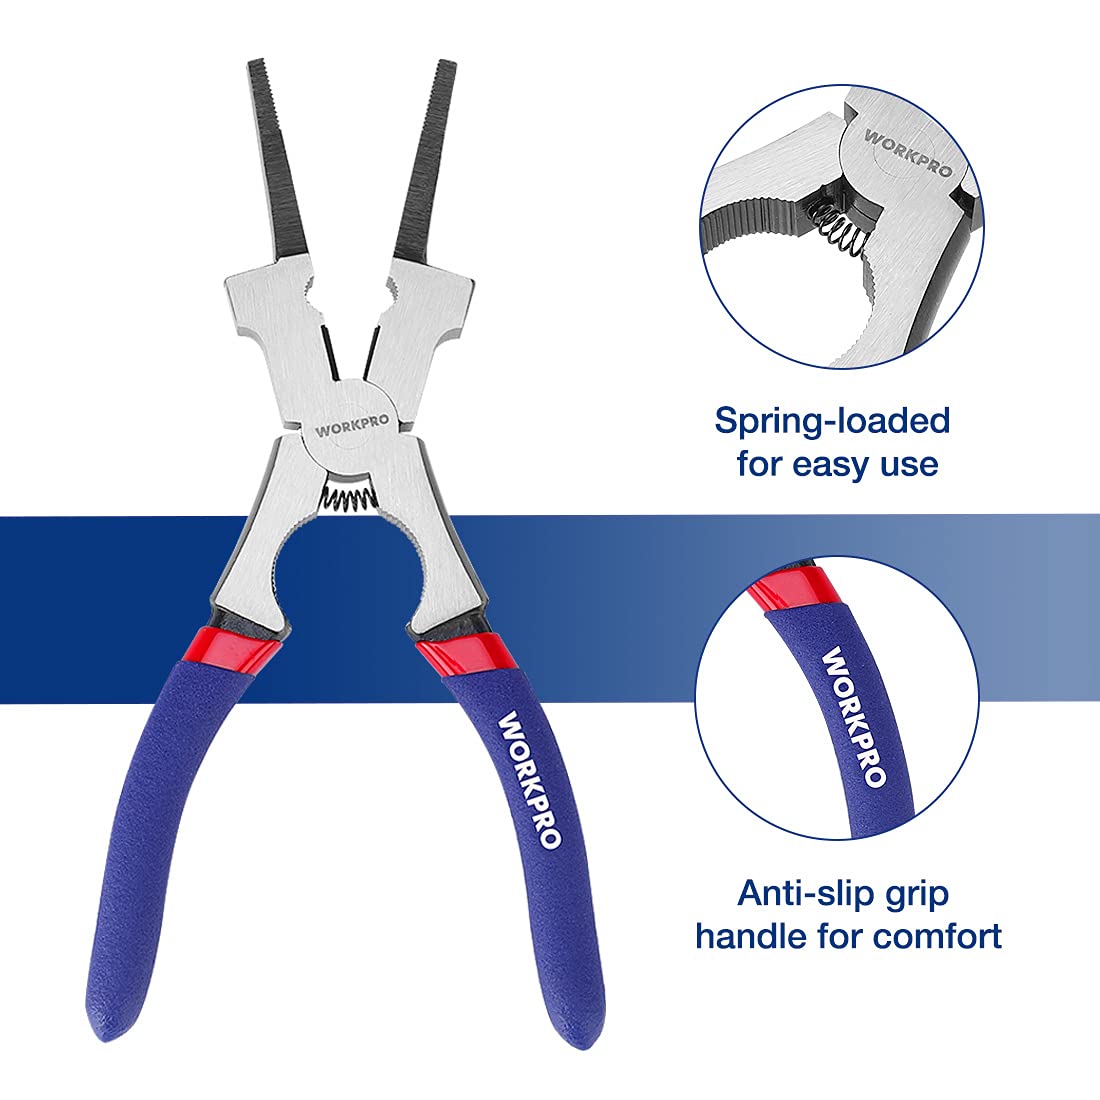 WORKPRO 8" Welding Pliers, Multi-Functional CR-V Steel Welding Pliers for Welding, Electrical, Mechanical, Workshop and Home Use